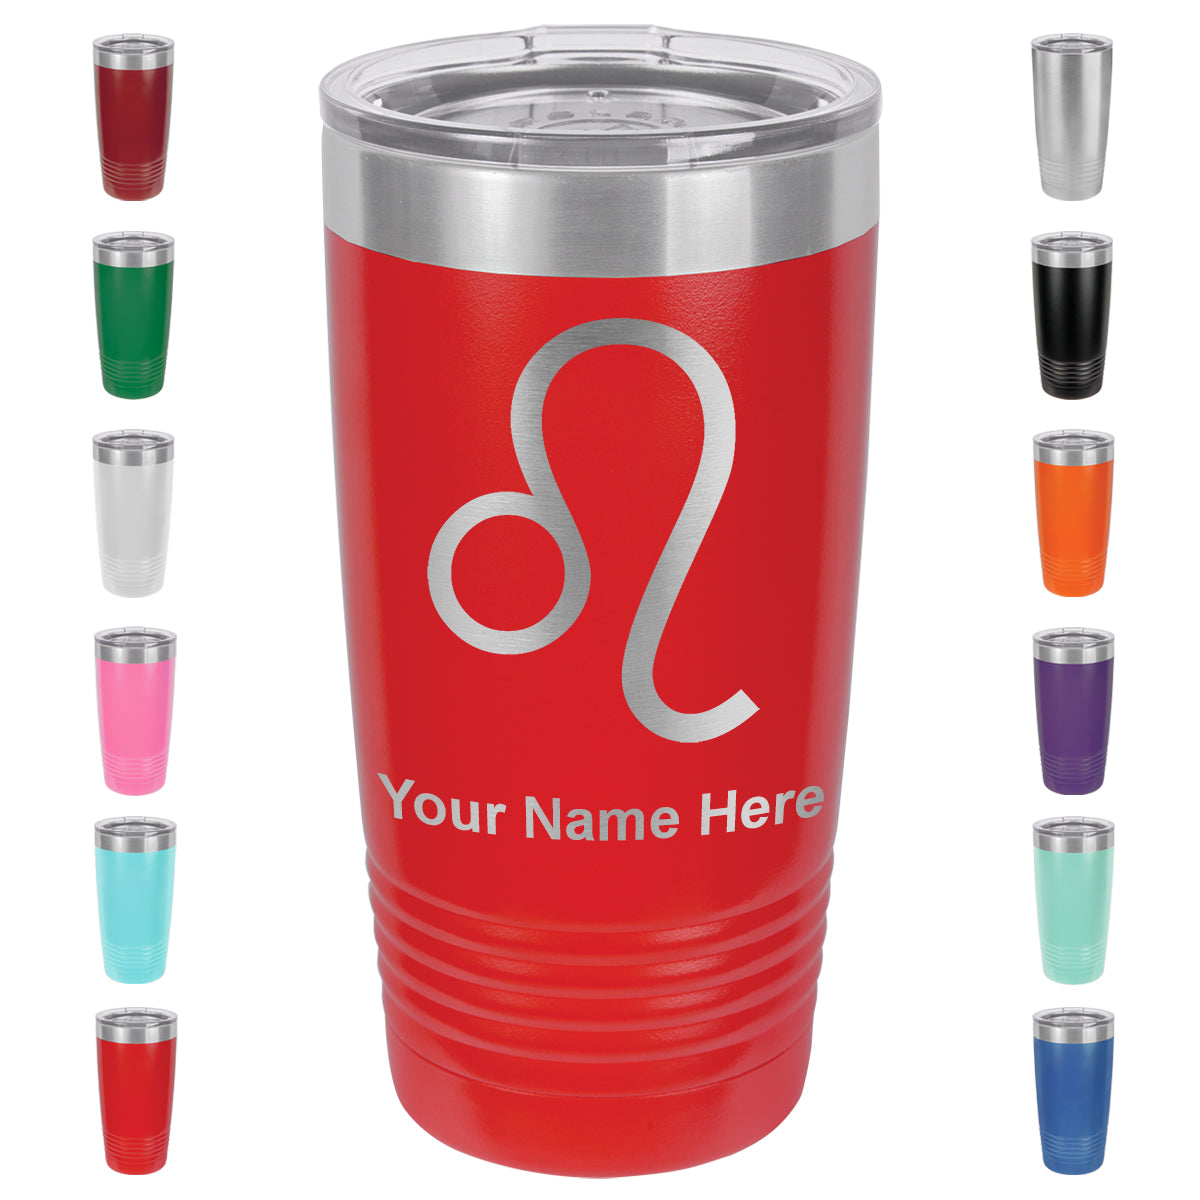 Personalized Tumbler, Insulated Tumbler, Personalize Tumbler with